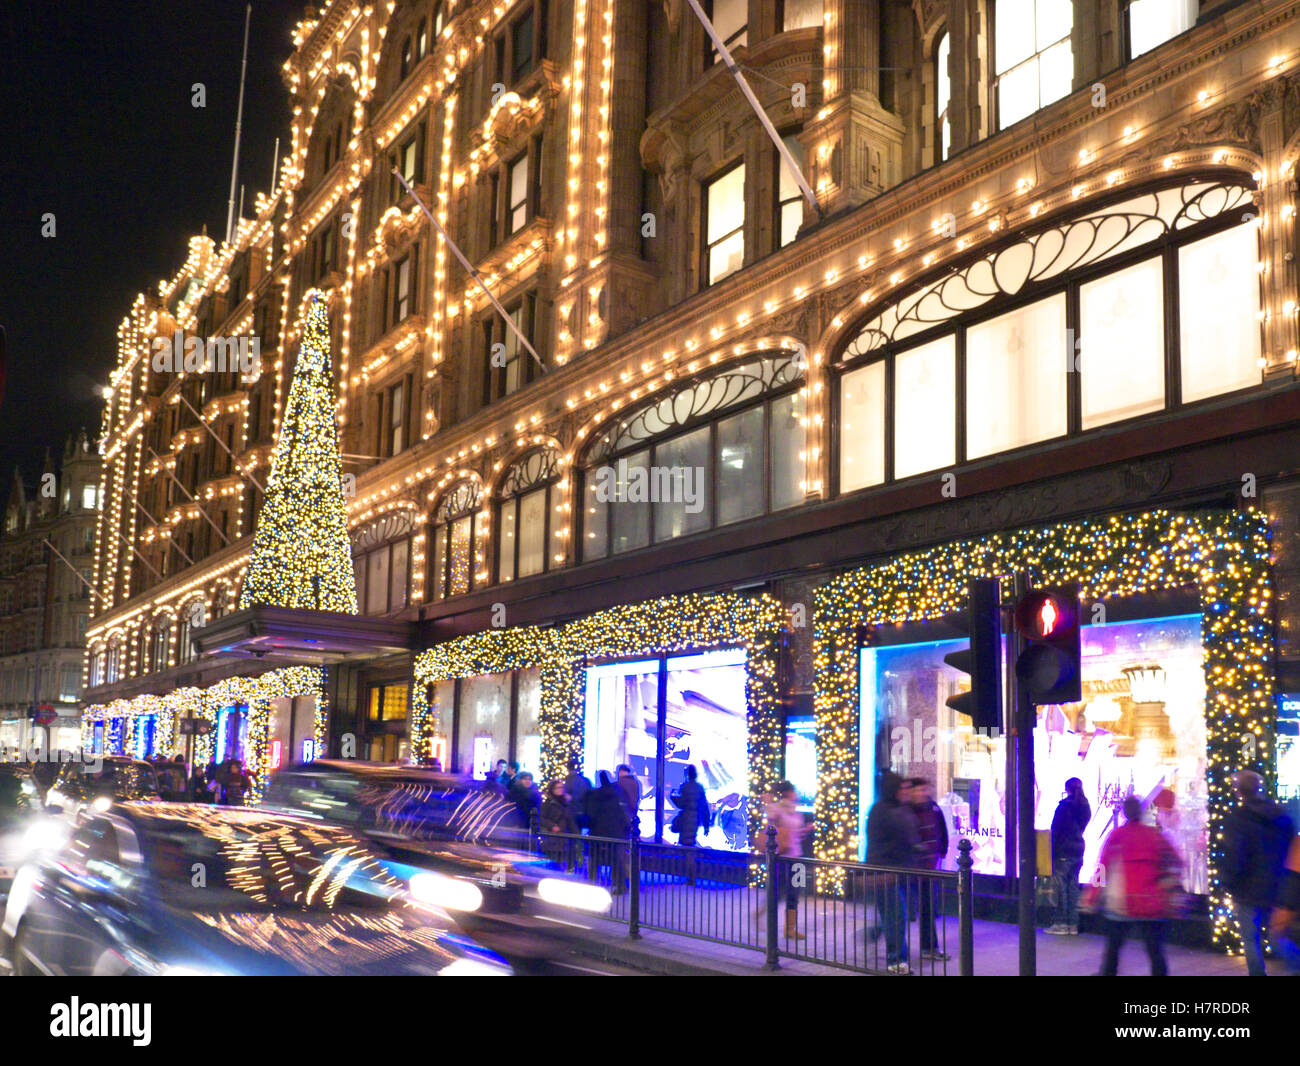 HARRODS CHRISTMAS TREE SHOPPING SHOPPERS LONDON Harrods department store at dusk with lights shopping crowds and passing cars Knightsbridge London SW1 Stock Photo -